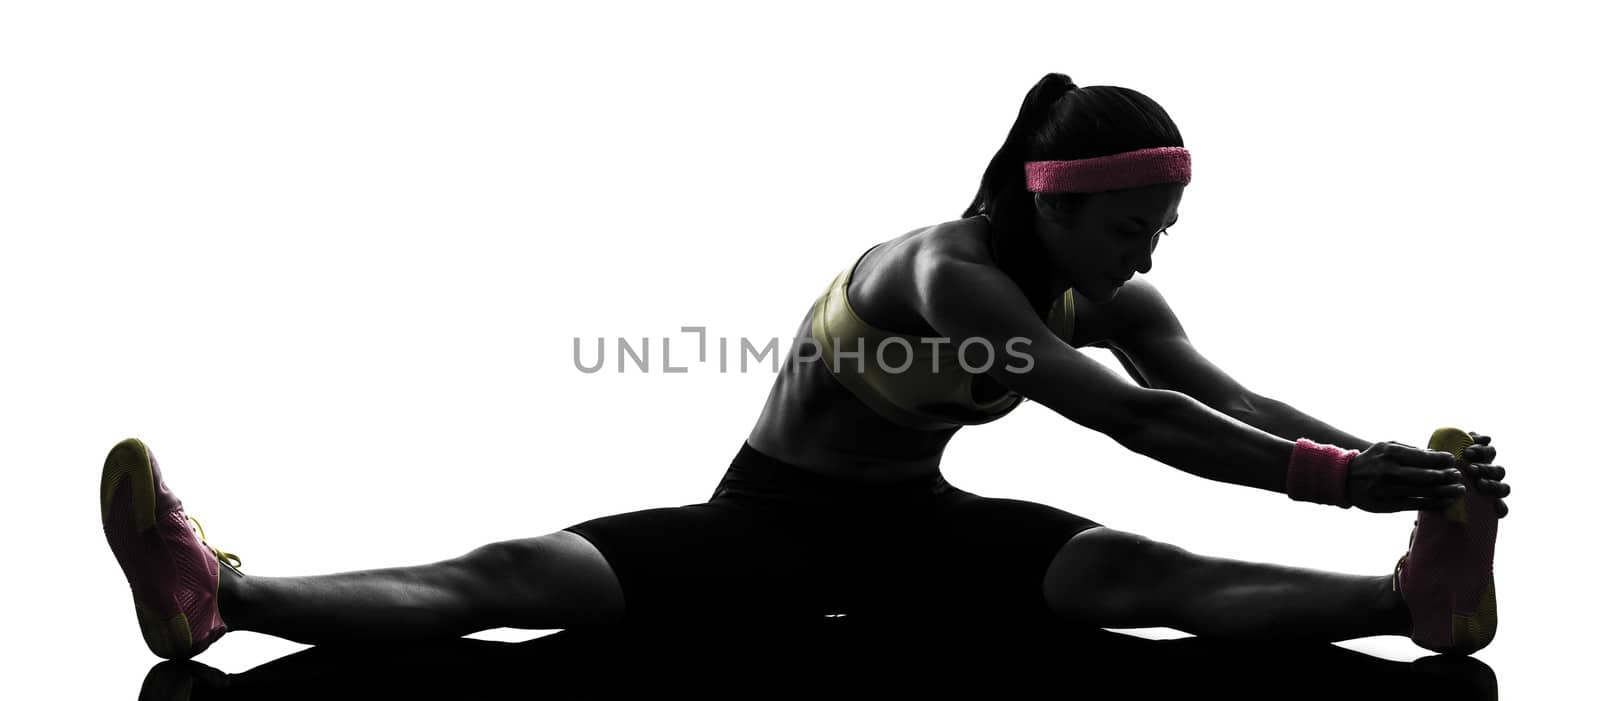 one woman exercising fitness workout in silhouette on white background